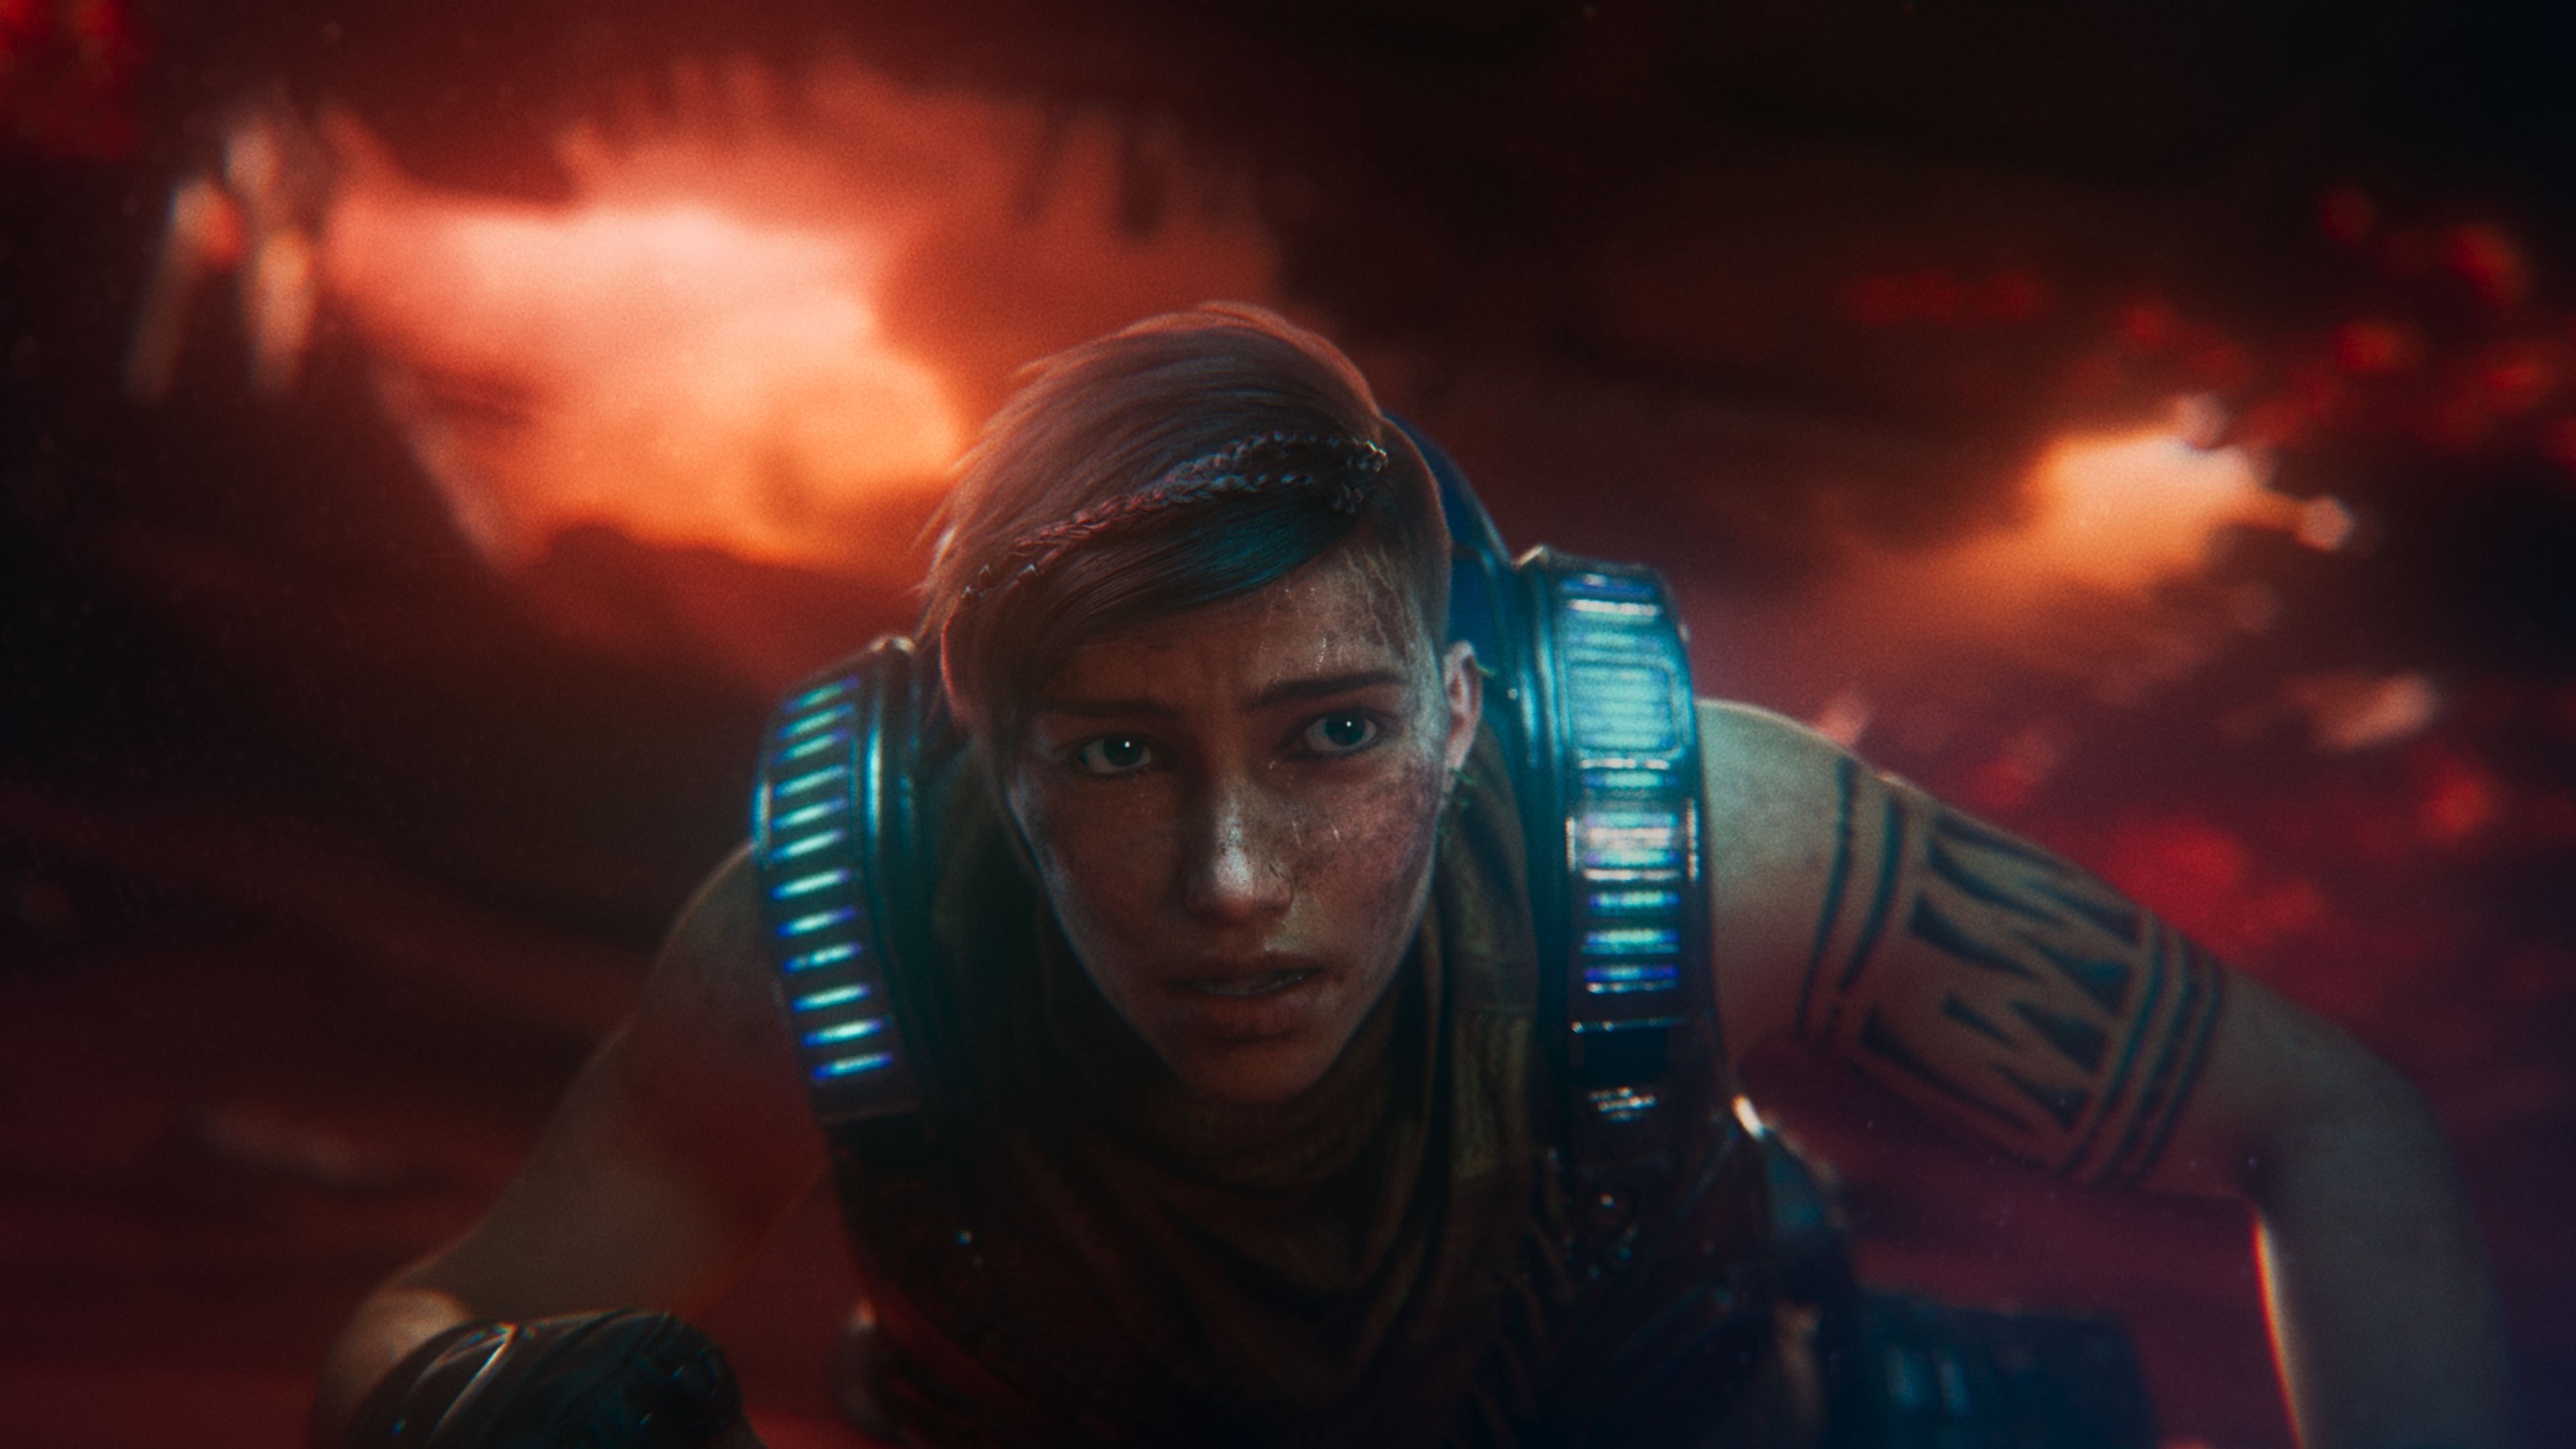 Minister Discovery discord Early access begins for 'Gears 5' Ultimate Edition owners and Xbox Game Pass  Ultimate members | Windows Experience Blog